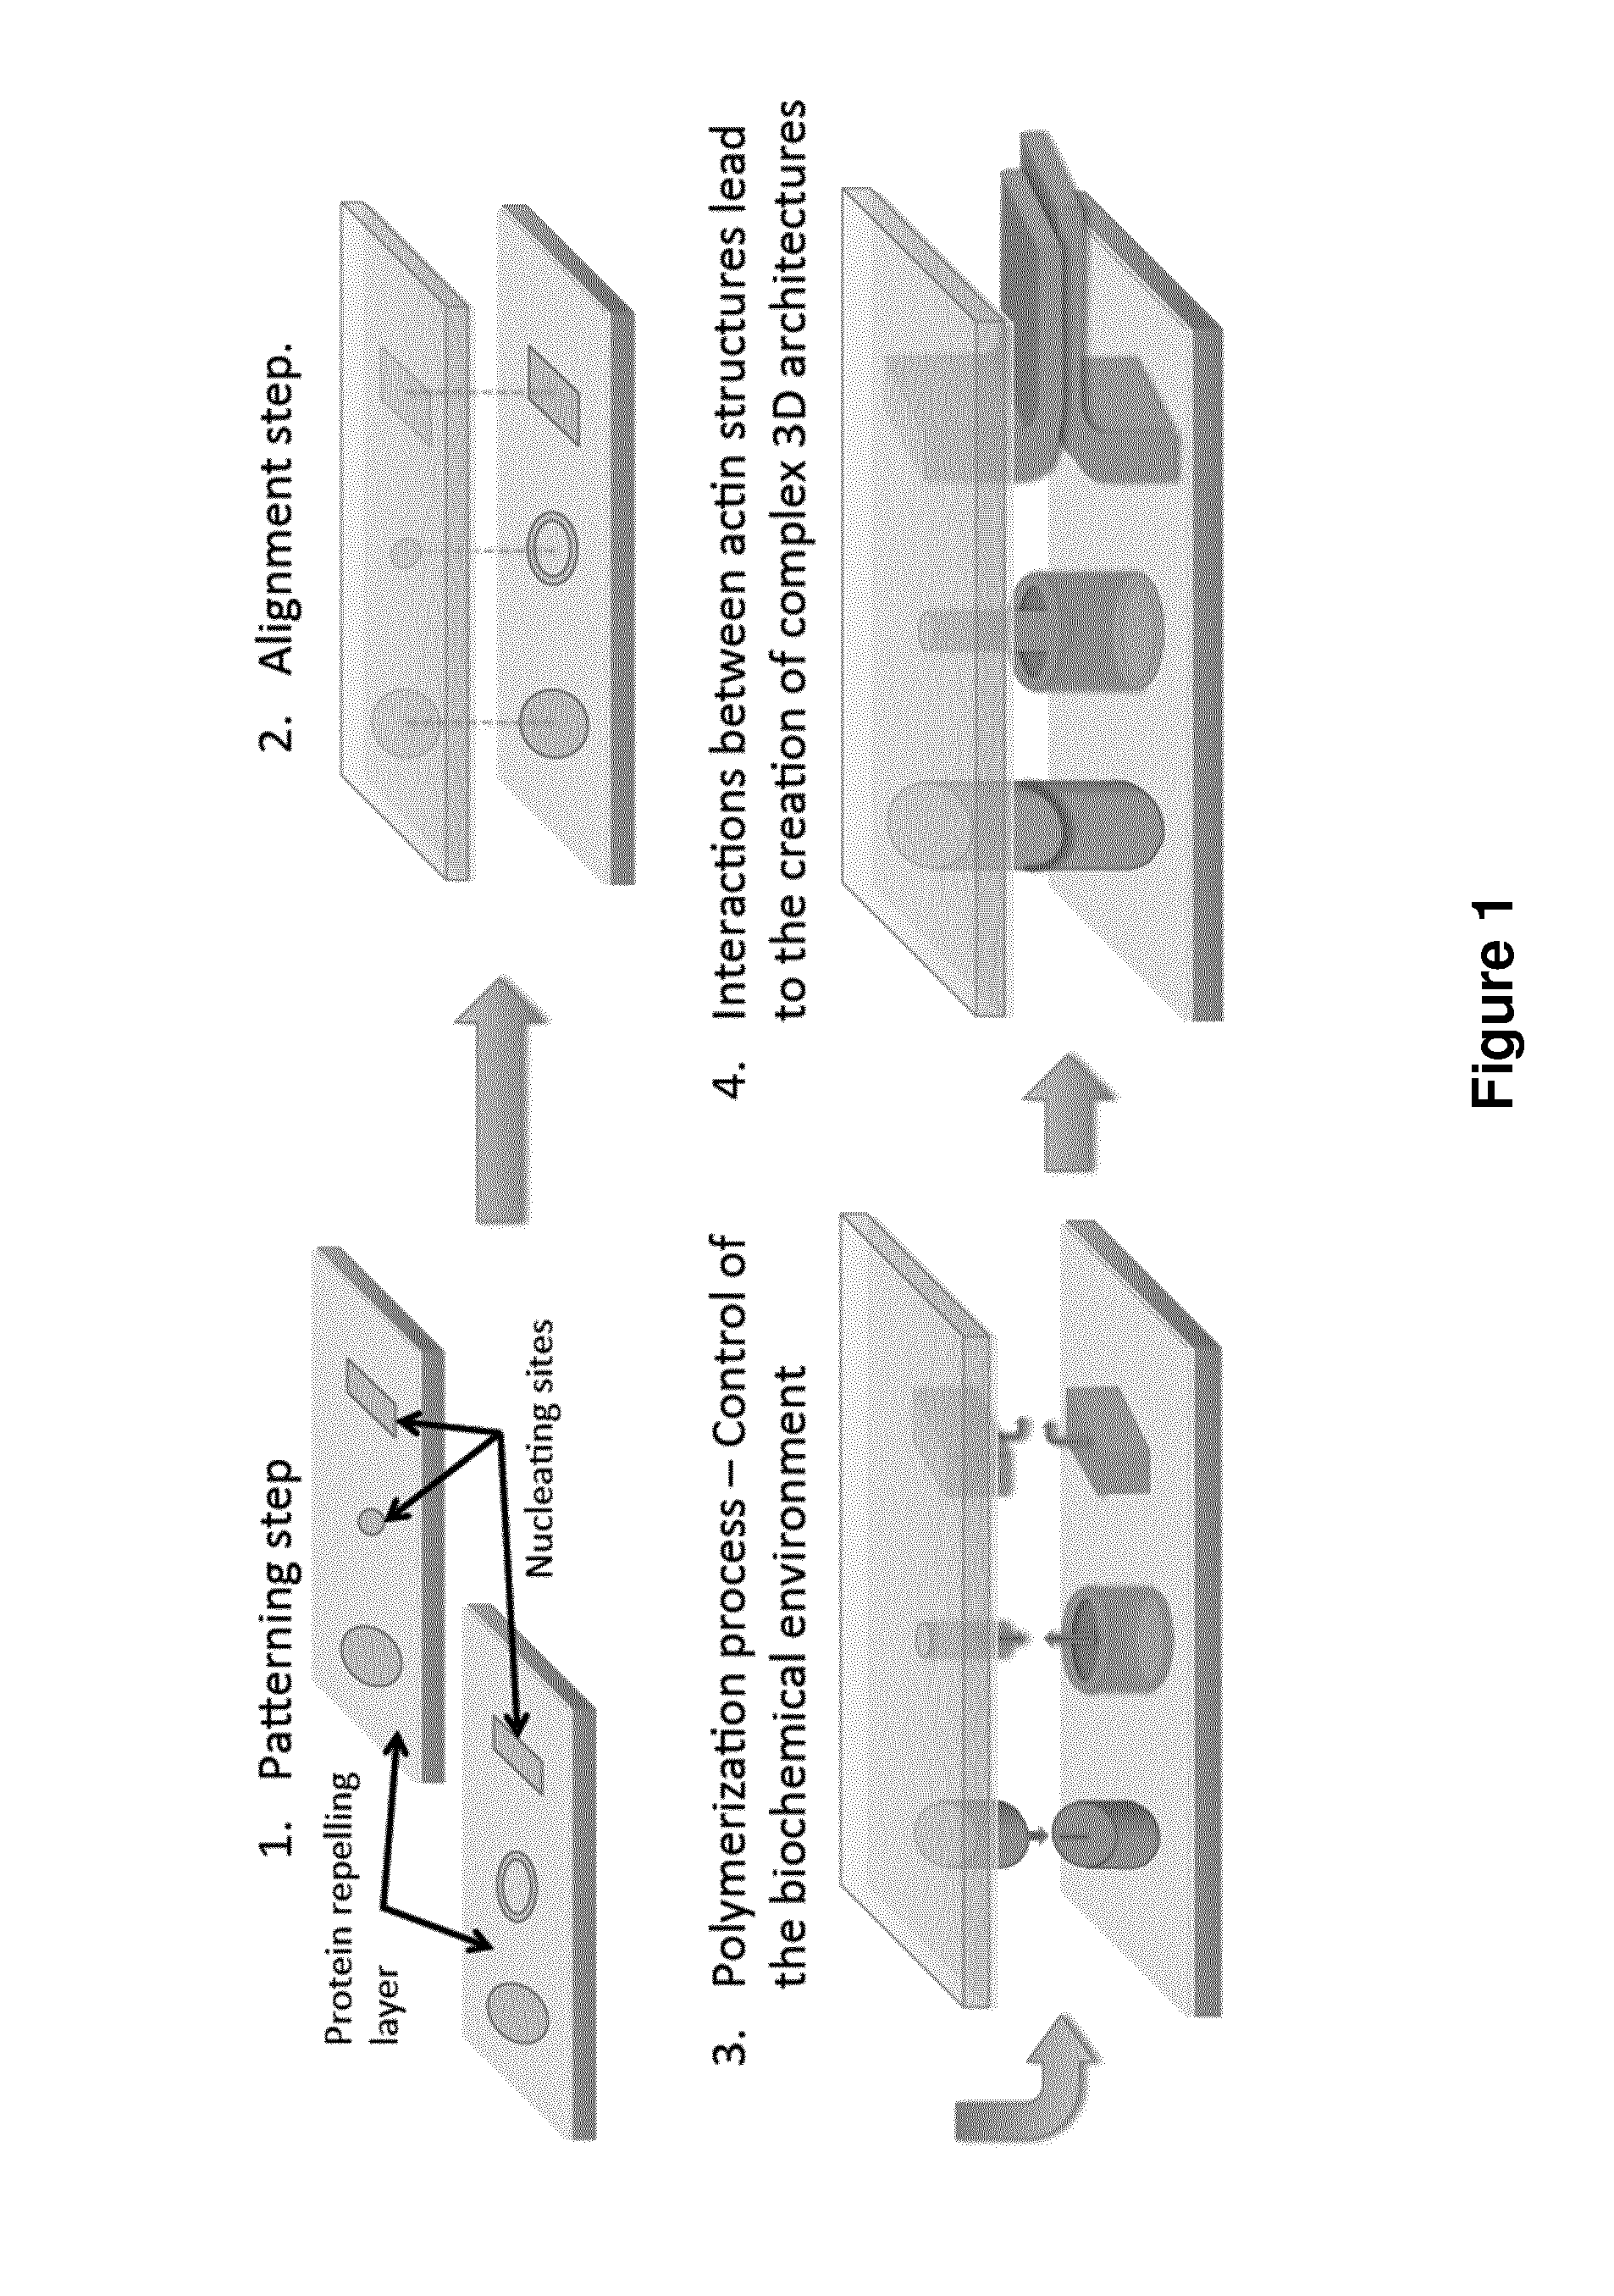 Method for obtaining three-dimensional actin structures and uses thereof